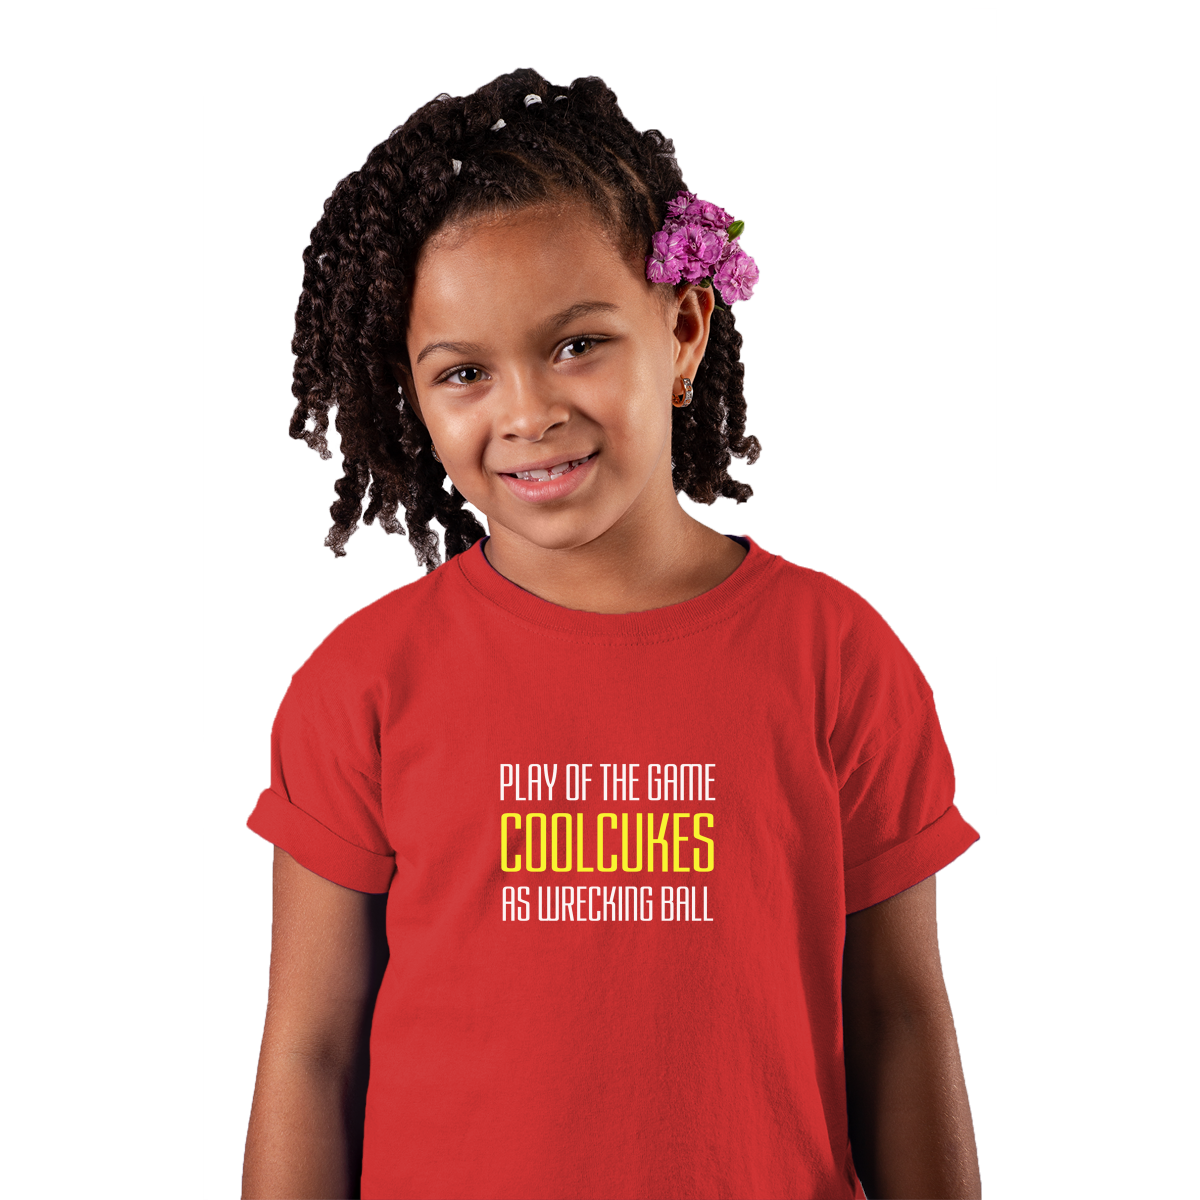 Play of the Game Kids T-shirt | Red